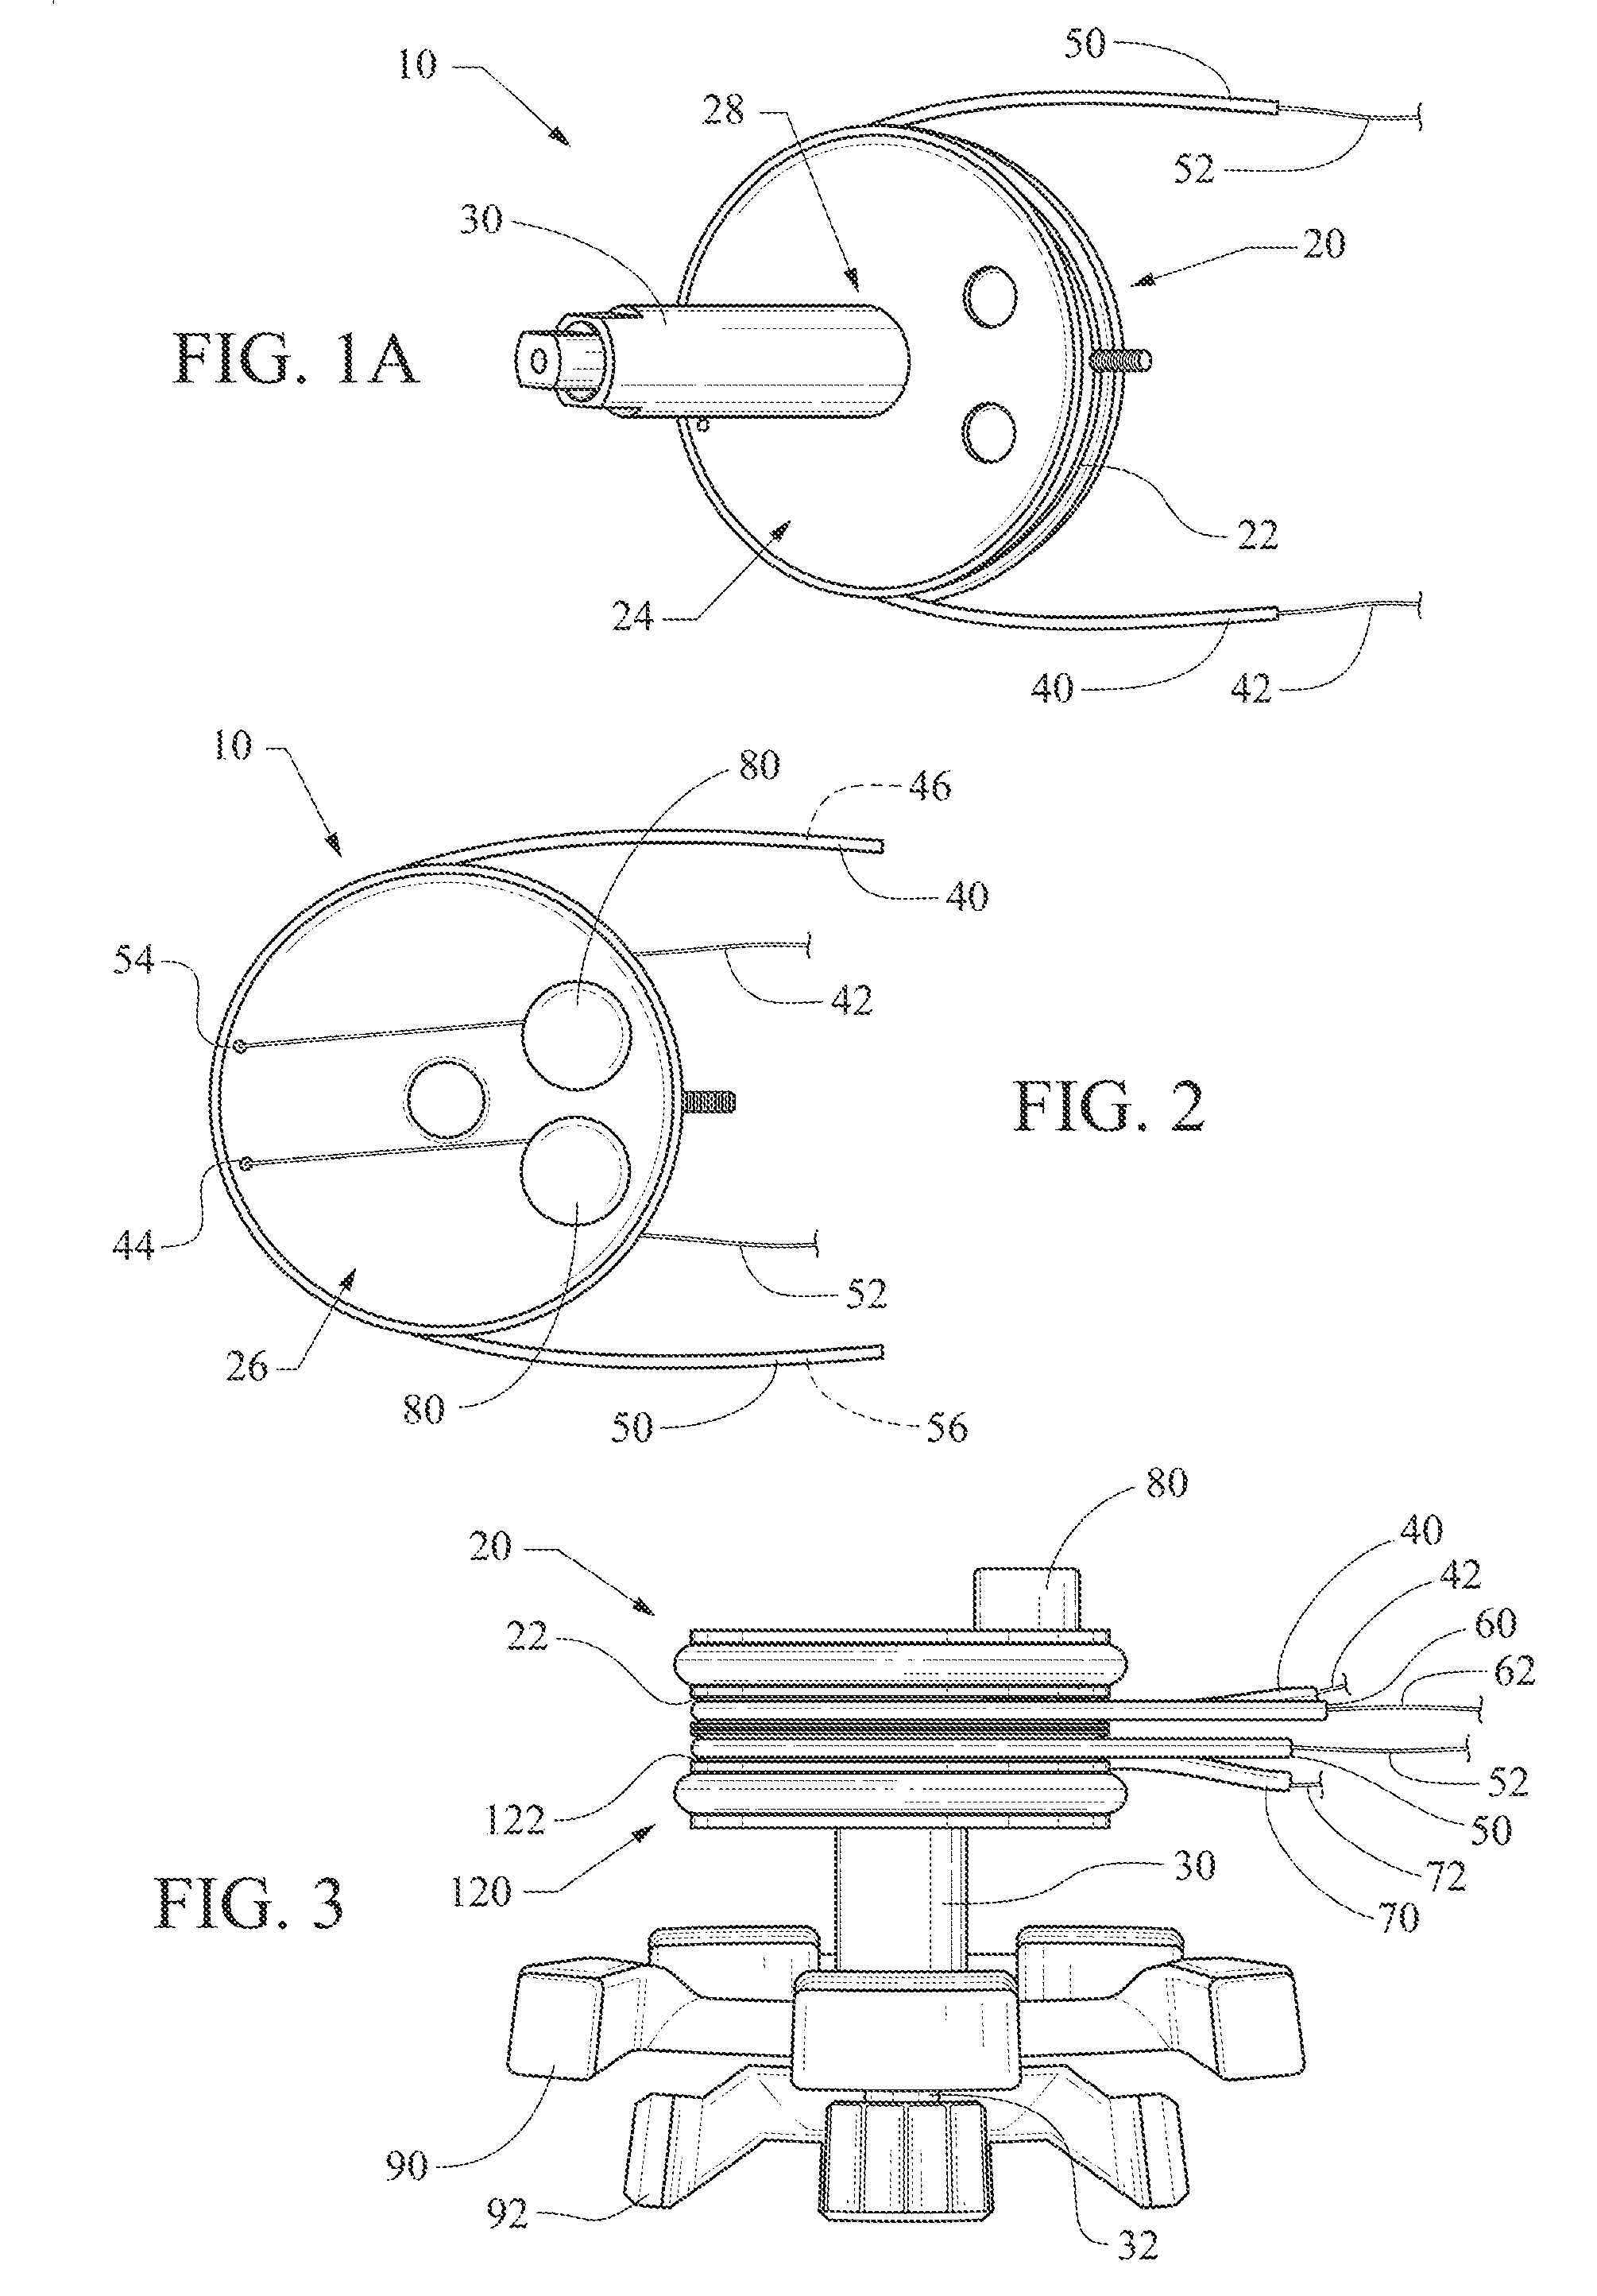 Mechanism of small drive wire retention on spool